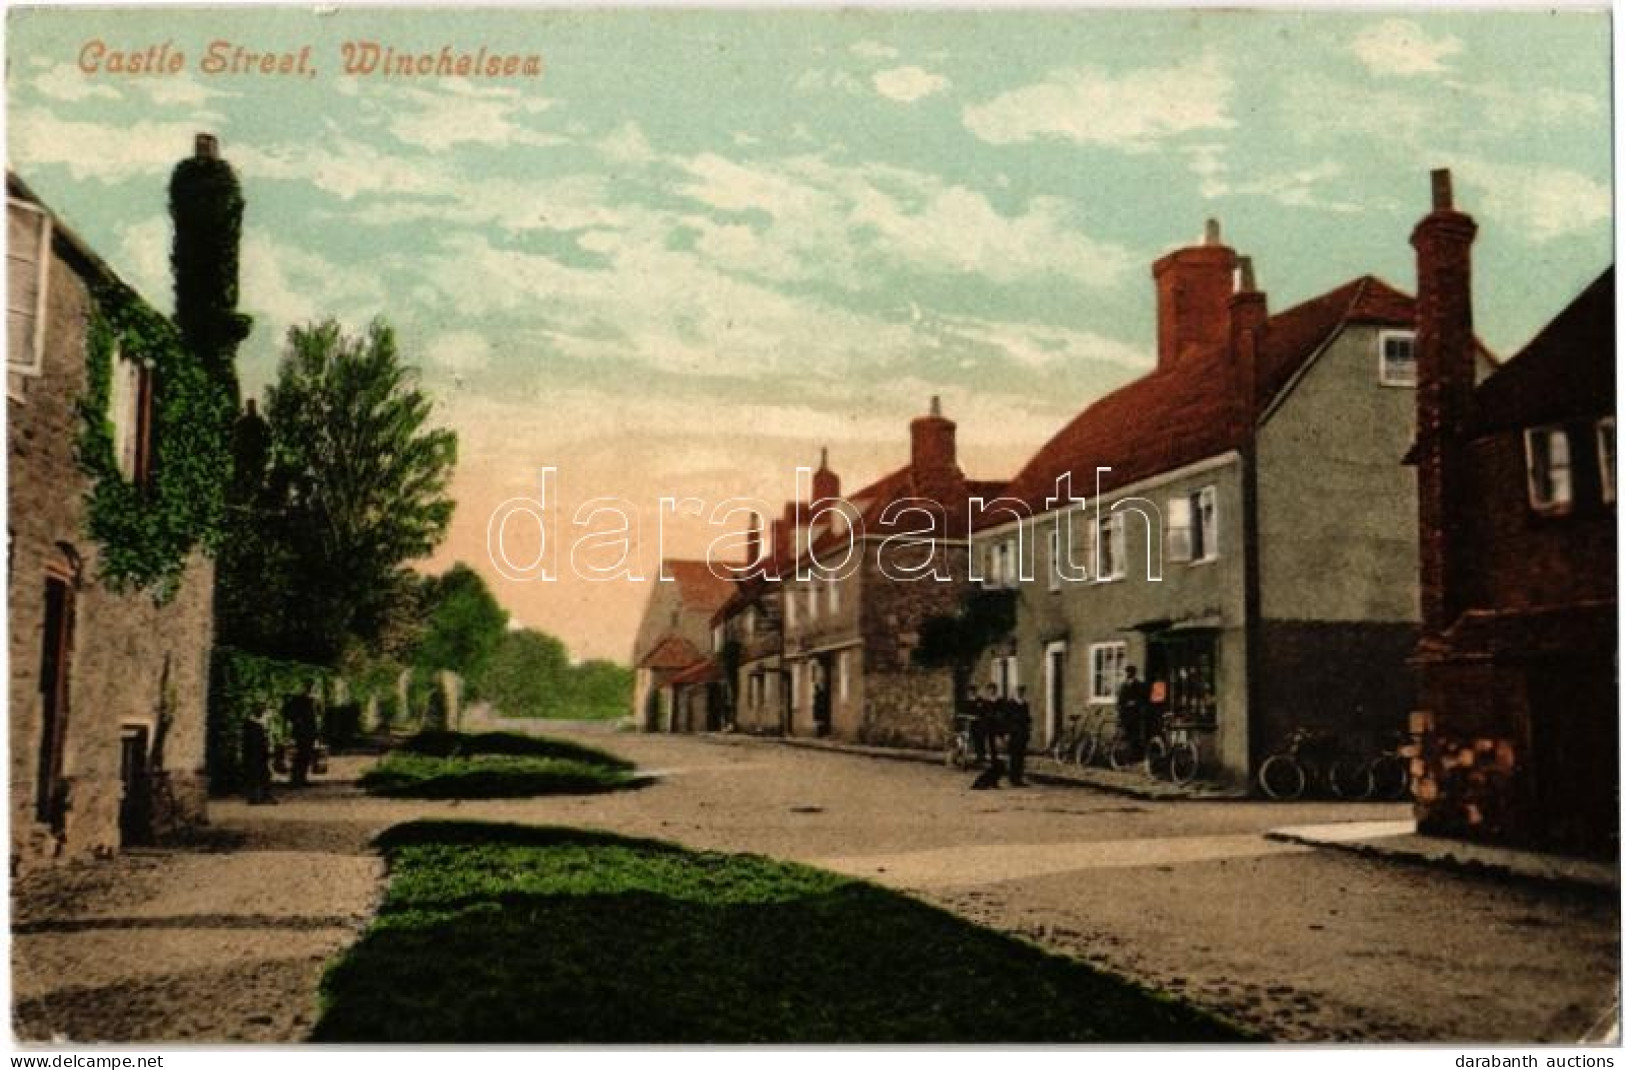 T2 Winchelsea, Castle Street , Shop, Bicycles - Ohne Zuordnung